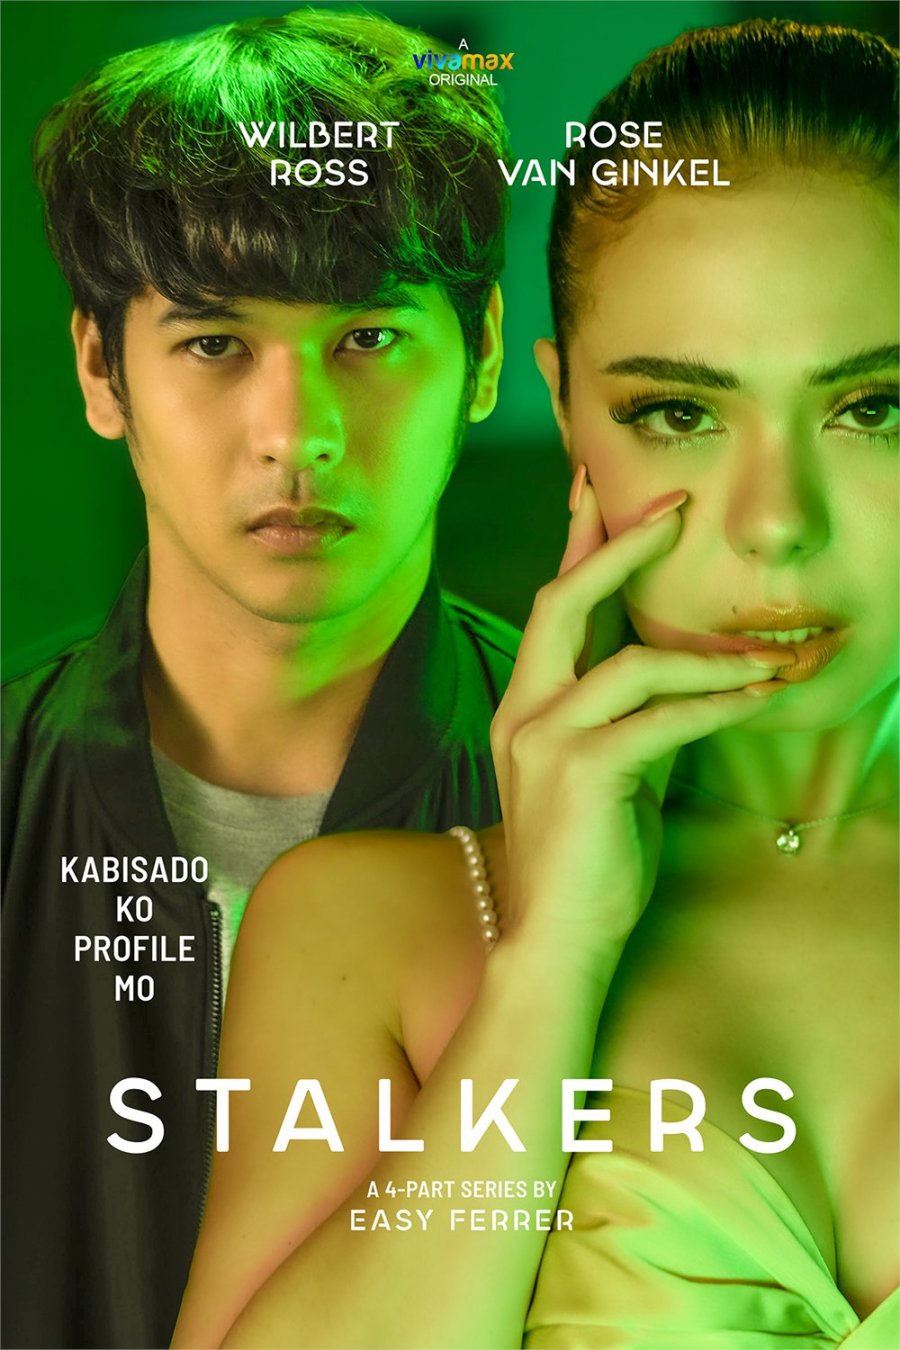 New movie] haunted by my stalker/look who's stalking (2023) : r/MaleYandere